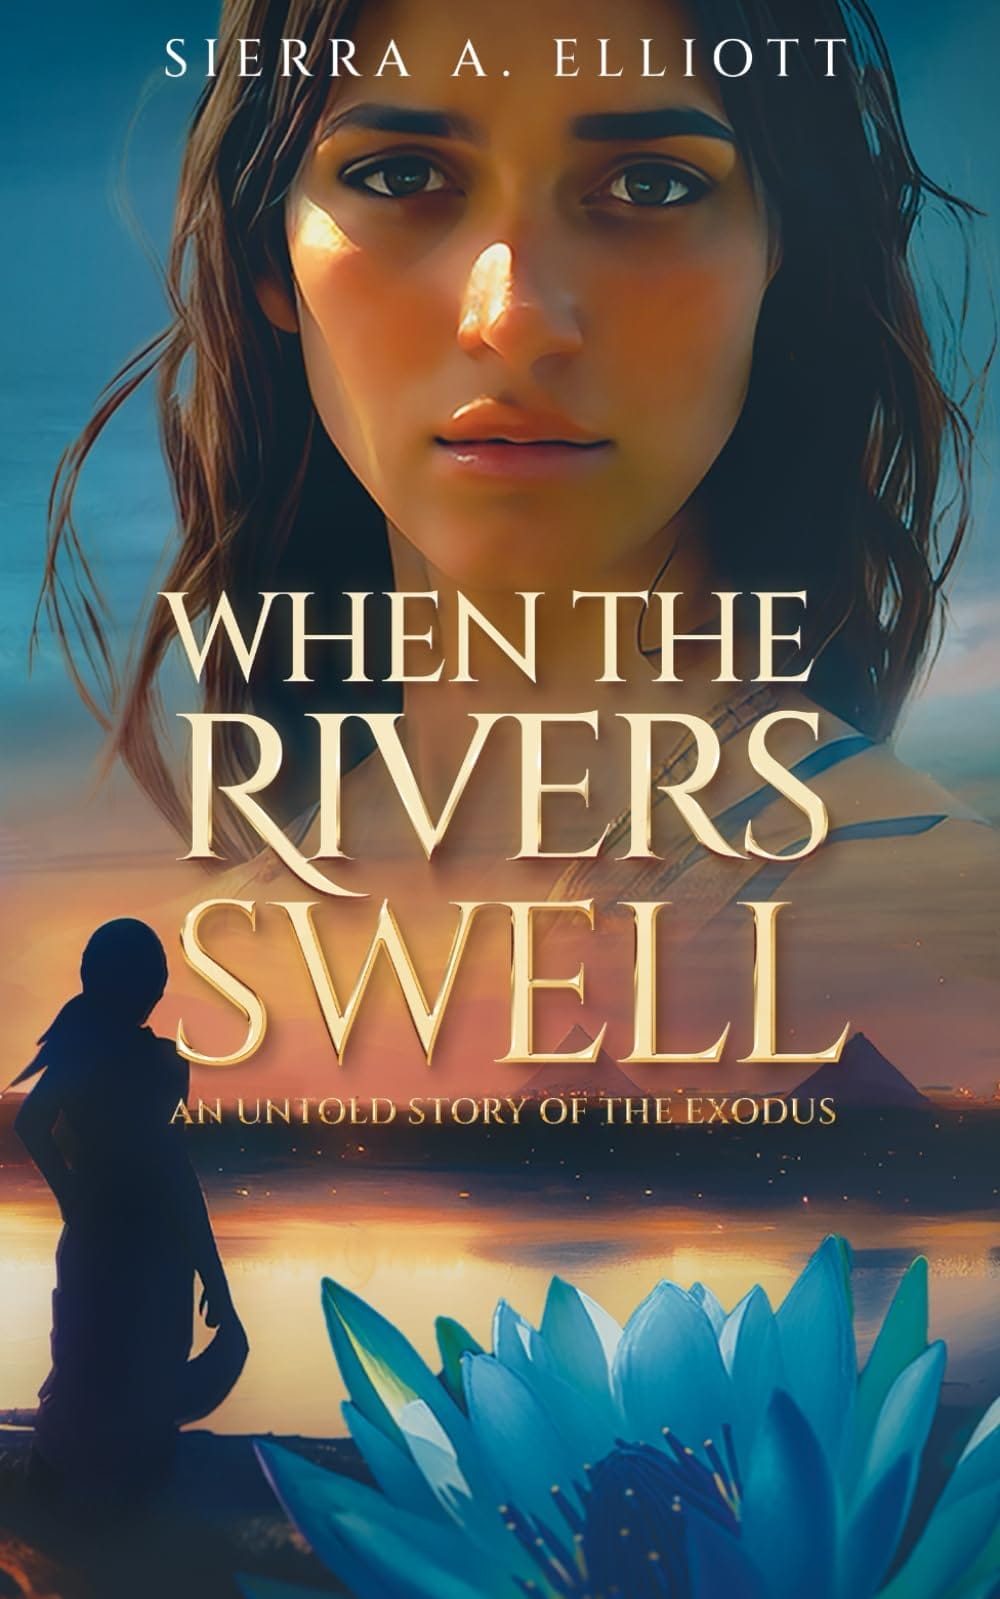 When the rivers swell by sierra elliott, the Healer guides those in need to safety.